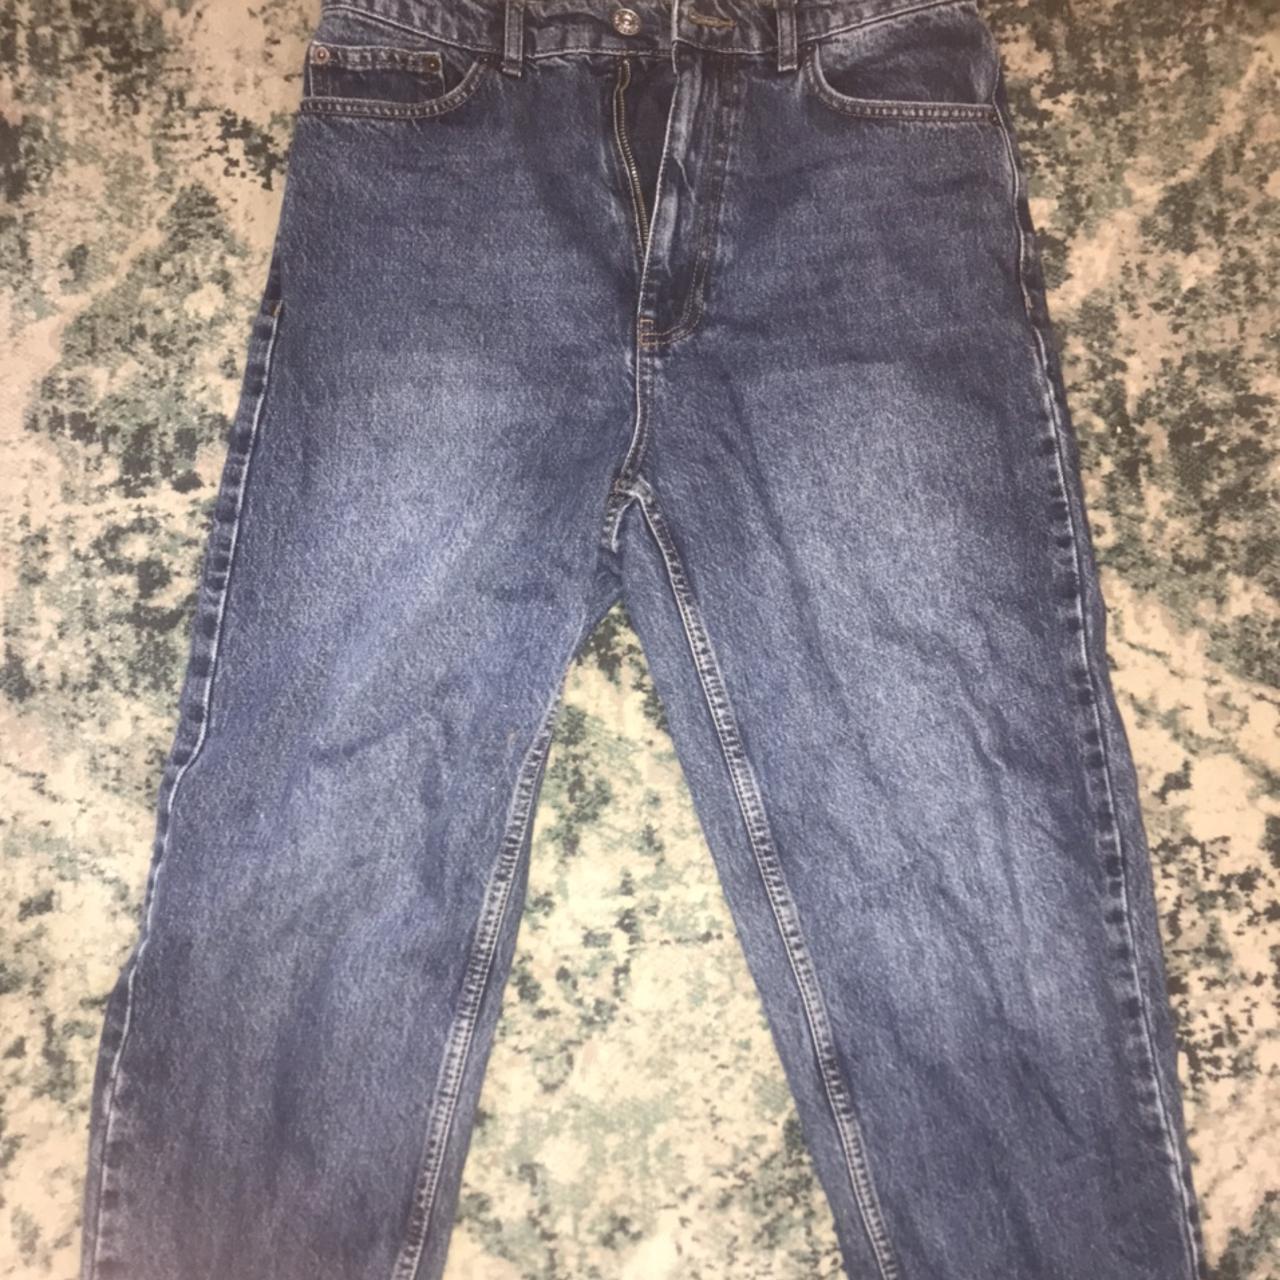 URBAN OUTFITTERS BDG “VINTAGE BOW” JEANS 30x30... - Depop